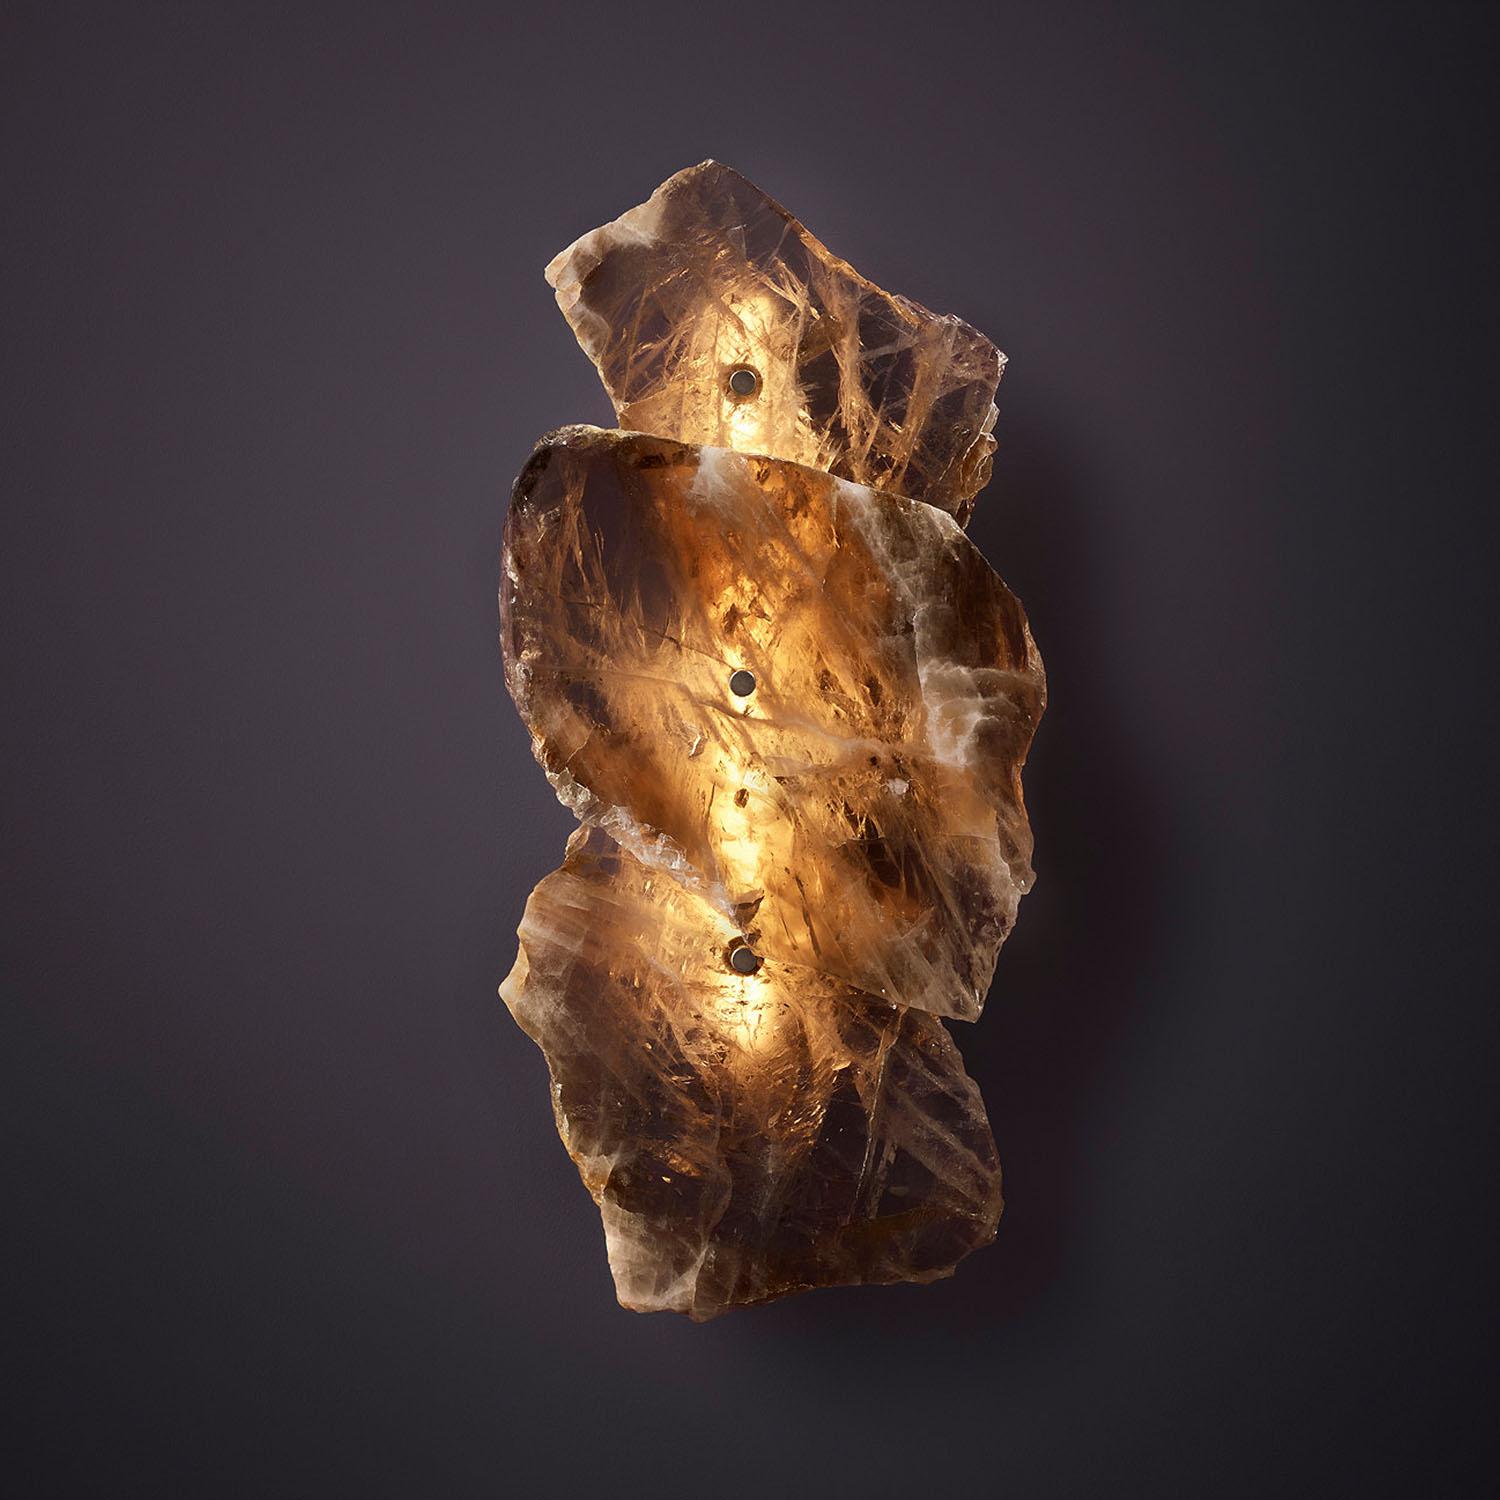 Contemporary wall sconce in Quartz with brass base - Petra I Triple by Christopher Boots

PETRA (from the Greek word ??t?a, meaning stone) celebrates the complexity and subtleties in the material composition in Quartz that PETRA is made